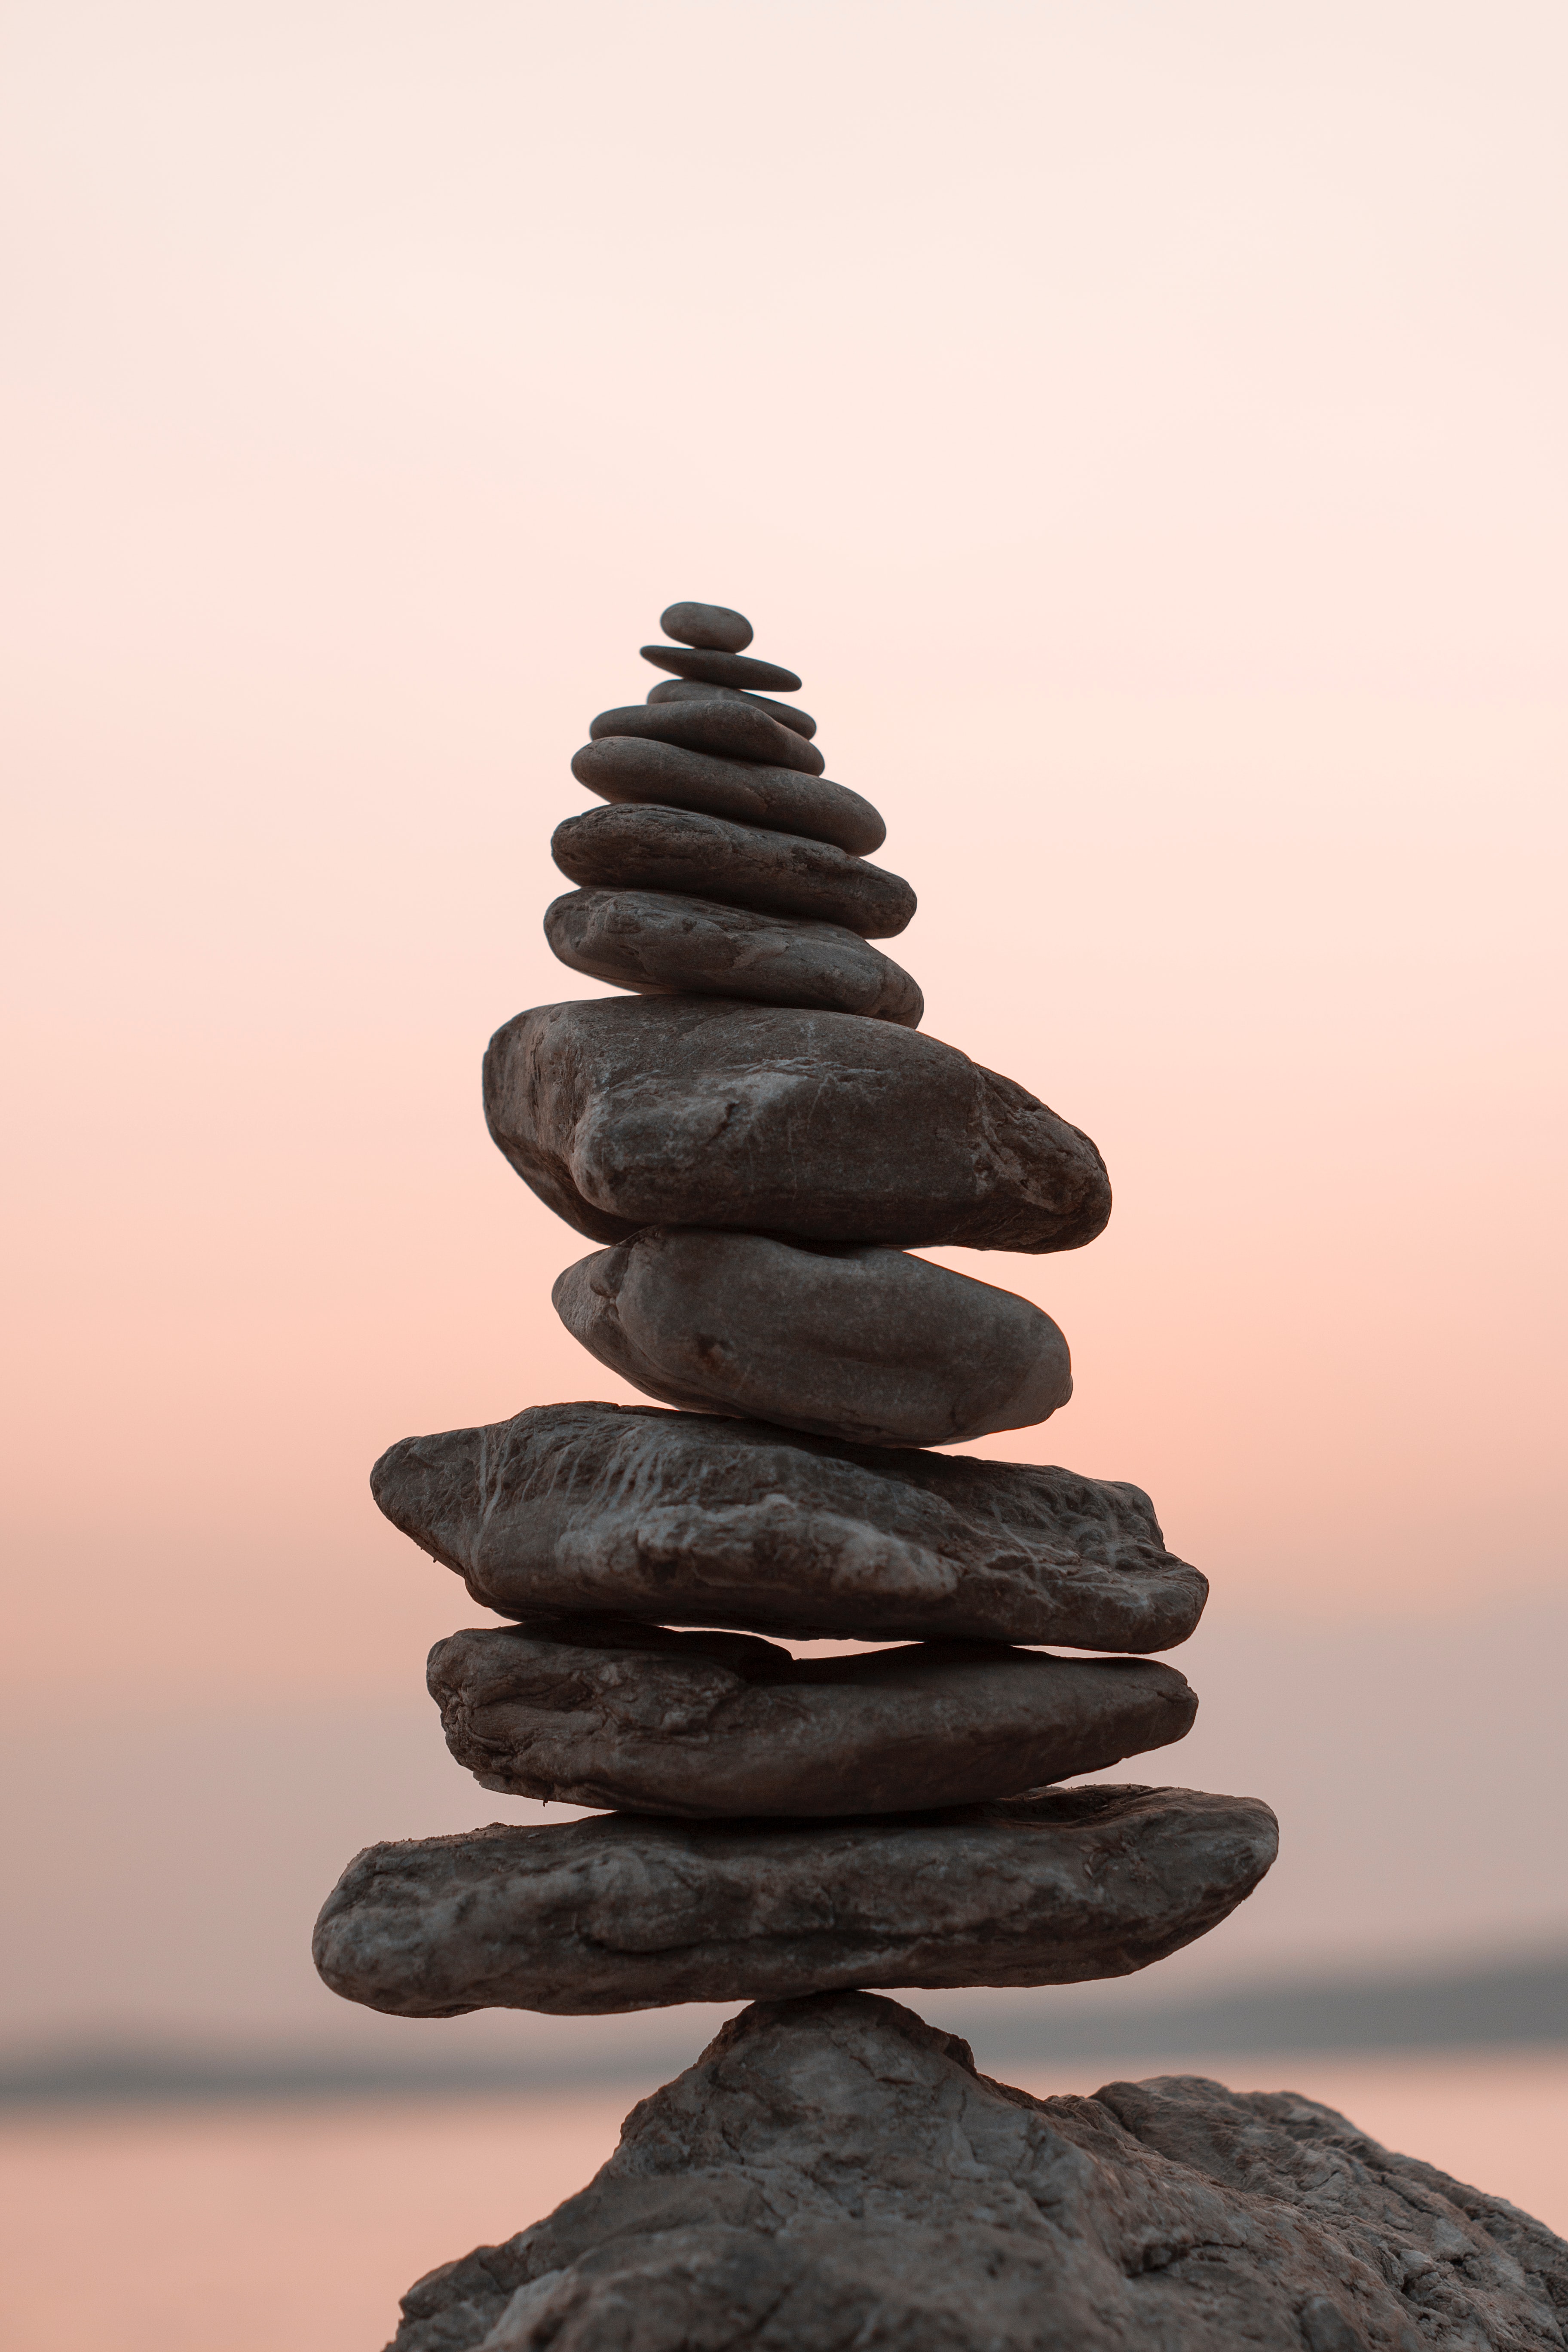 Stacked dark rocks, or cairn, against a sunset background